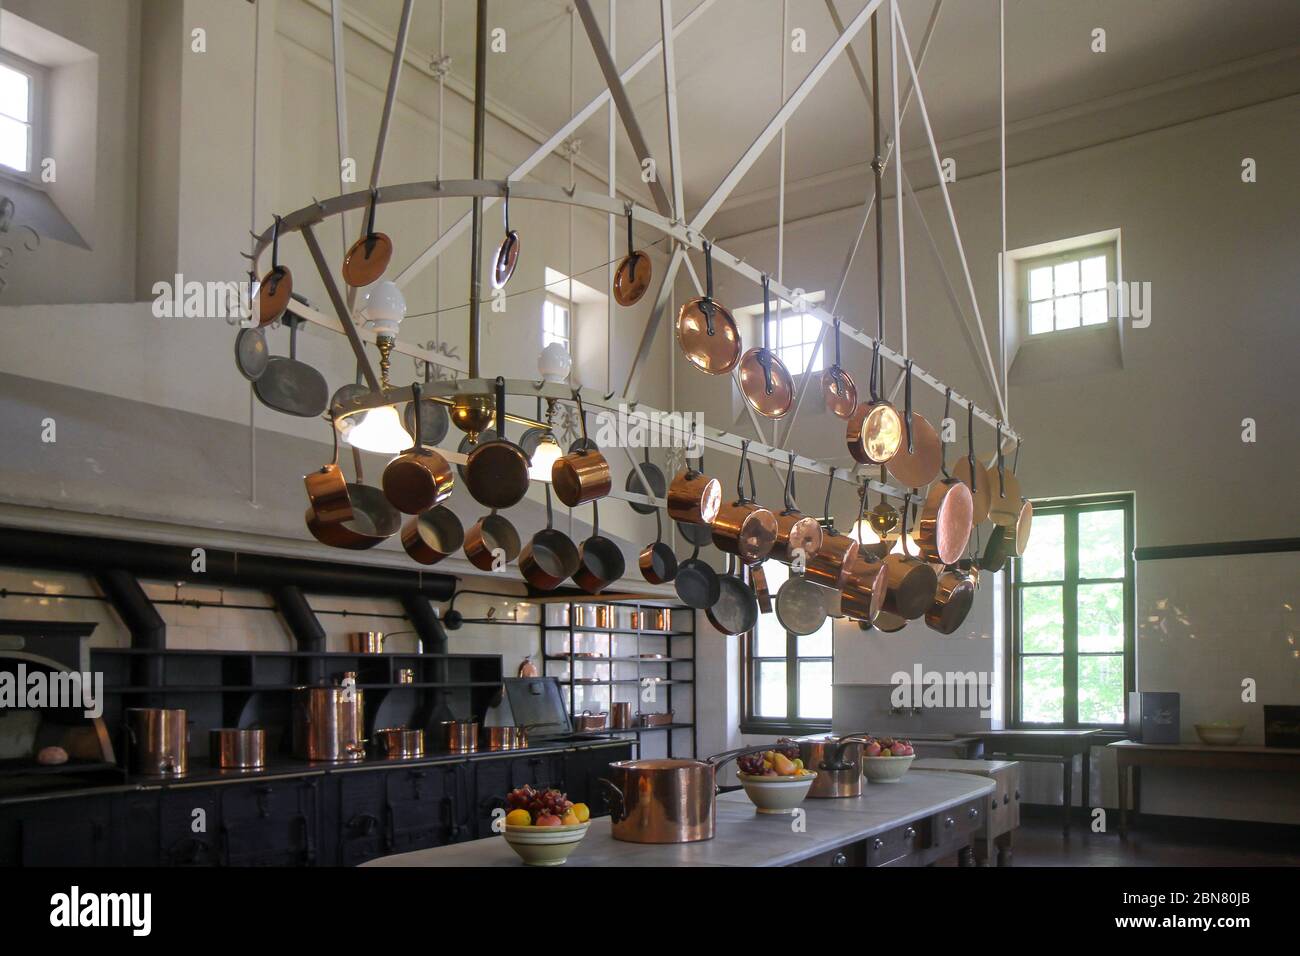 The kitchen at the Breakers mansion, Newport, Rhode Island, United States Stock Photo